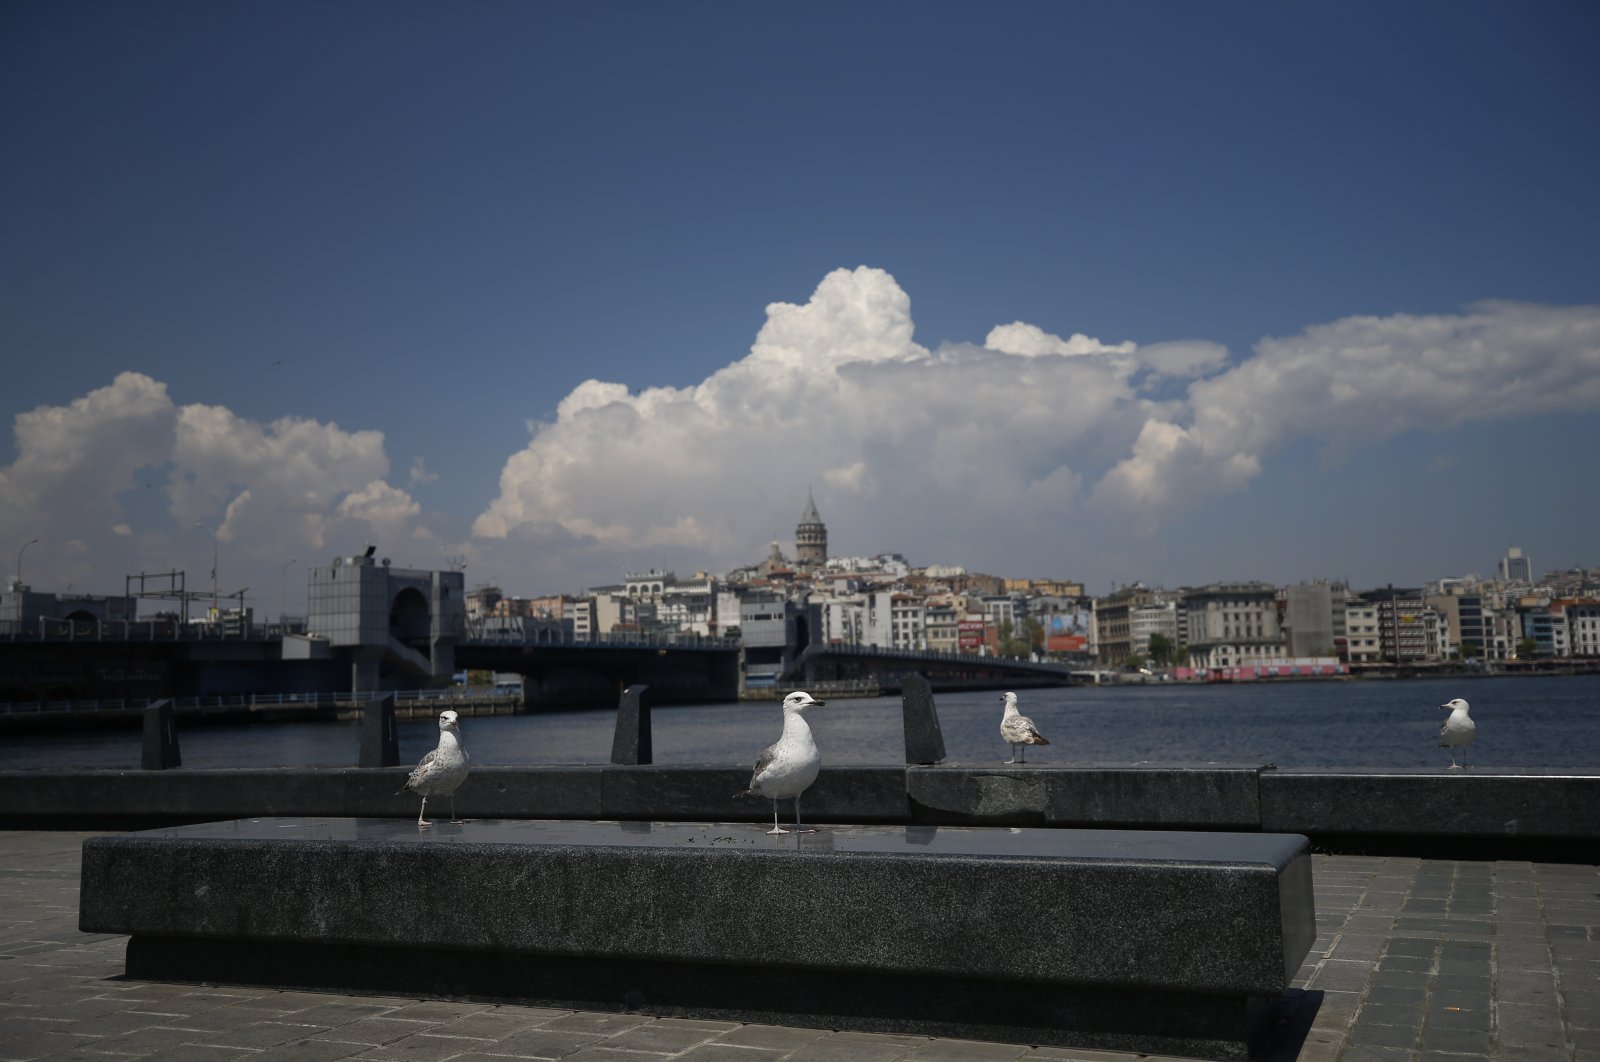 Seagulls are seen by the Golden Horn, deserted due to the coronavirus lockdown, in Istanbul, Turkey, May 1, 2020. (AP Photo)